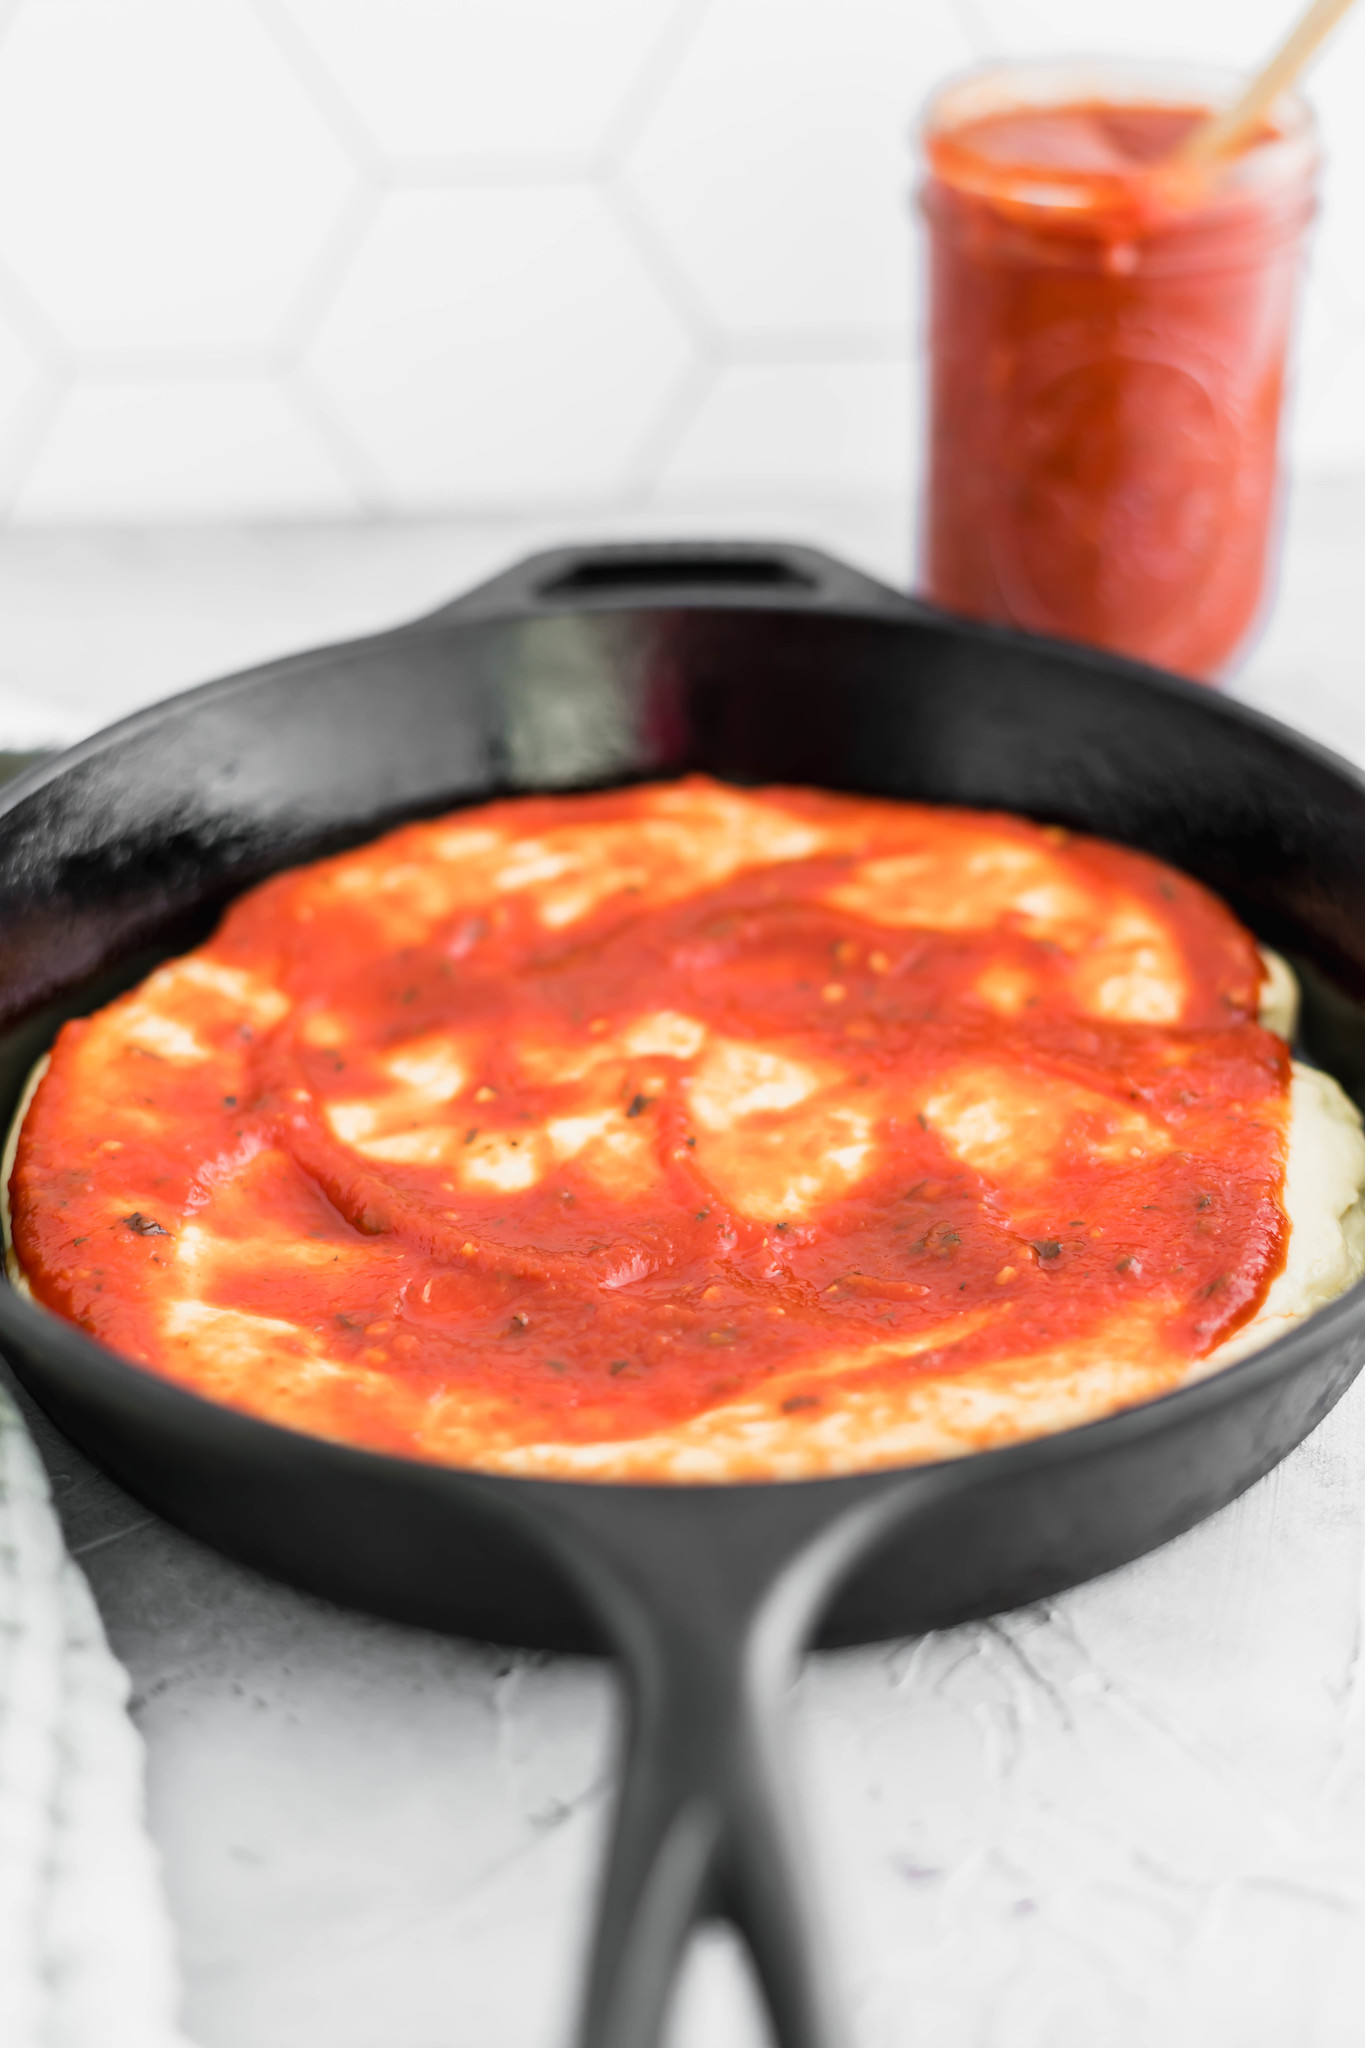 Movie night just got a whole lot better with this Cast Iron Skillet Pizza. It has the perfect crispy bottom and is topped with your favorite pizza toppings.